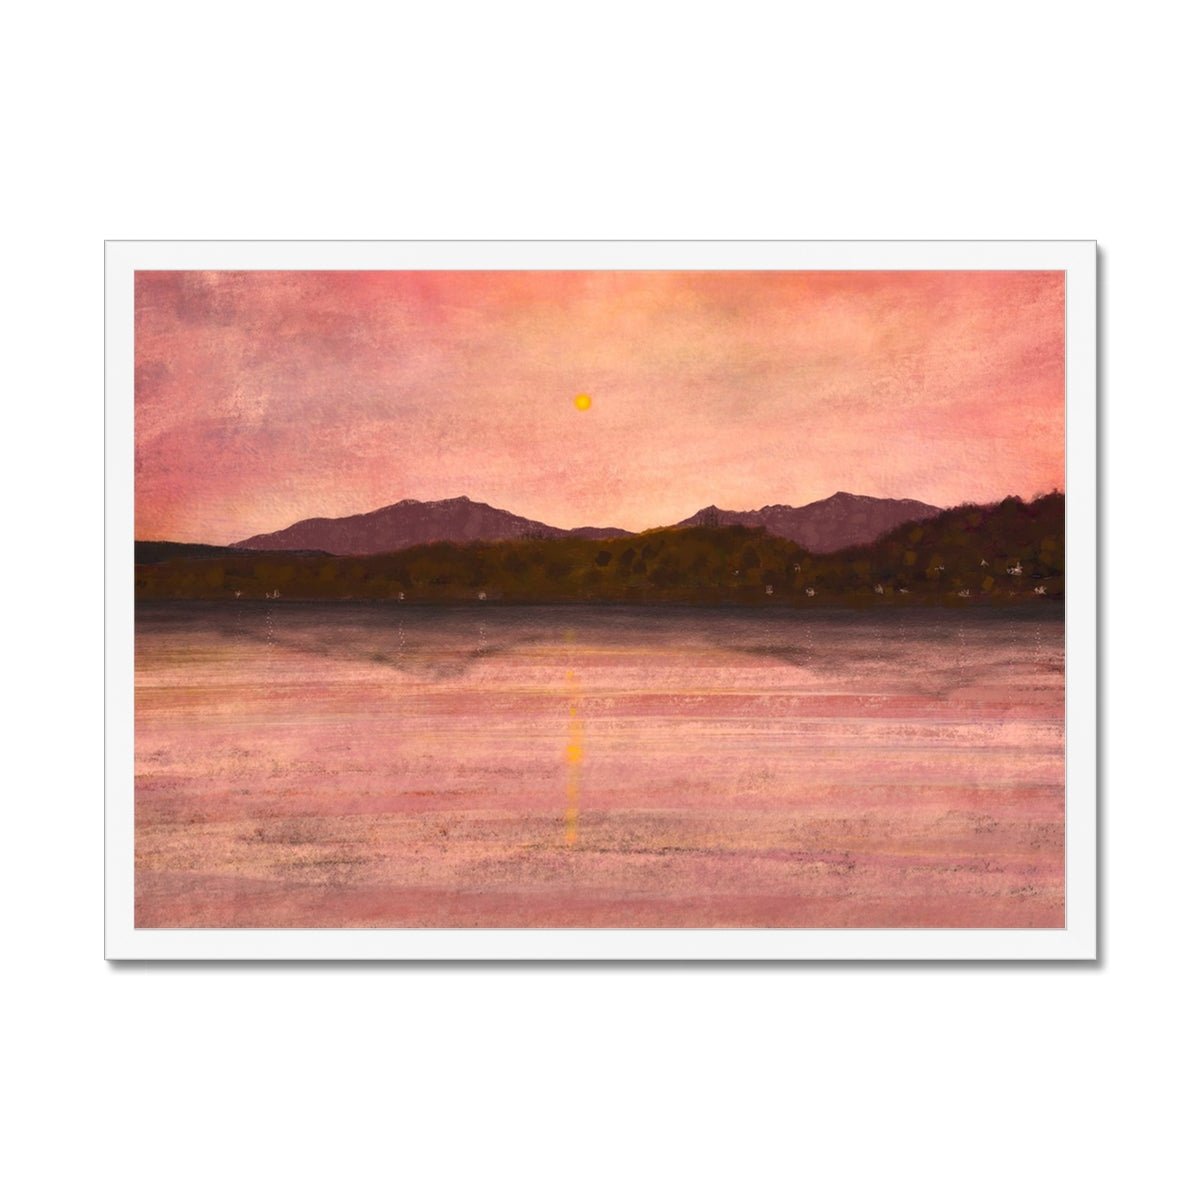 Dusk Over Arran & Bute Painting | Framed Prints From Scotland-Framed Prints-Arran Art Gallery-A2 Landscape-White Frame-Paintings, Prints, Homeware, Art Gifts From Scotland By Scottish Artist Kevin Hunter